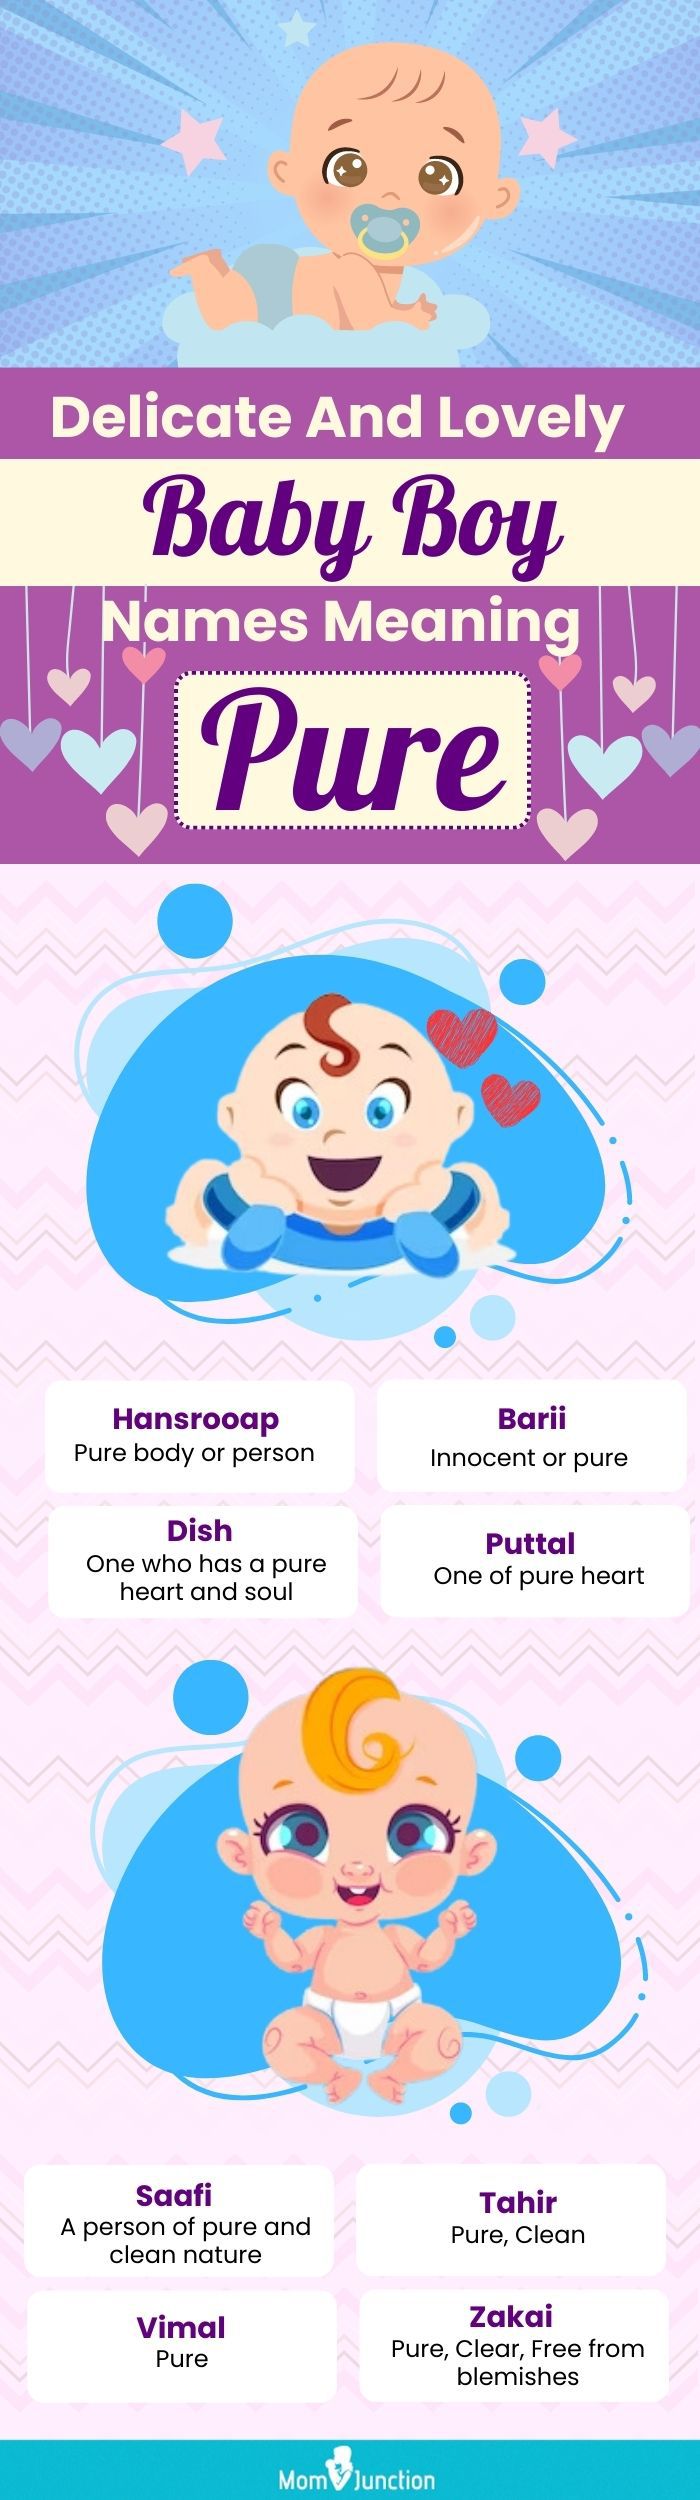 delicate and lovely baby boy names meaning pure (infographic)